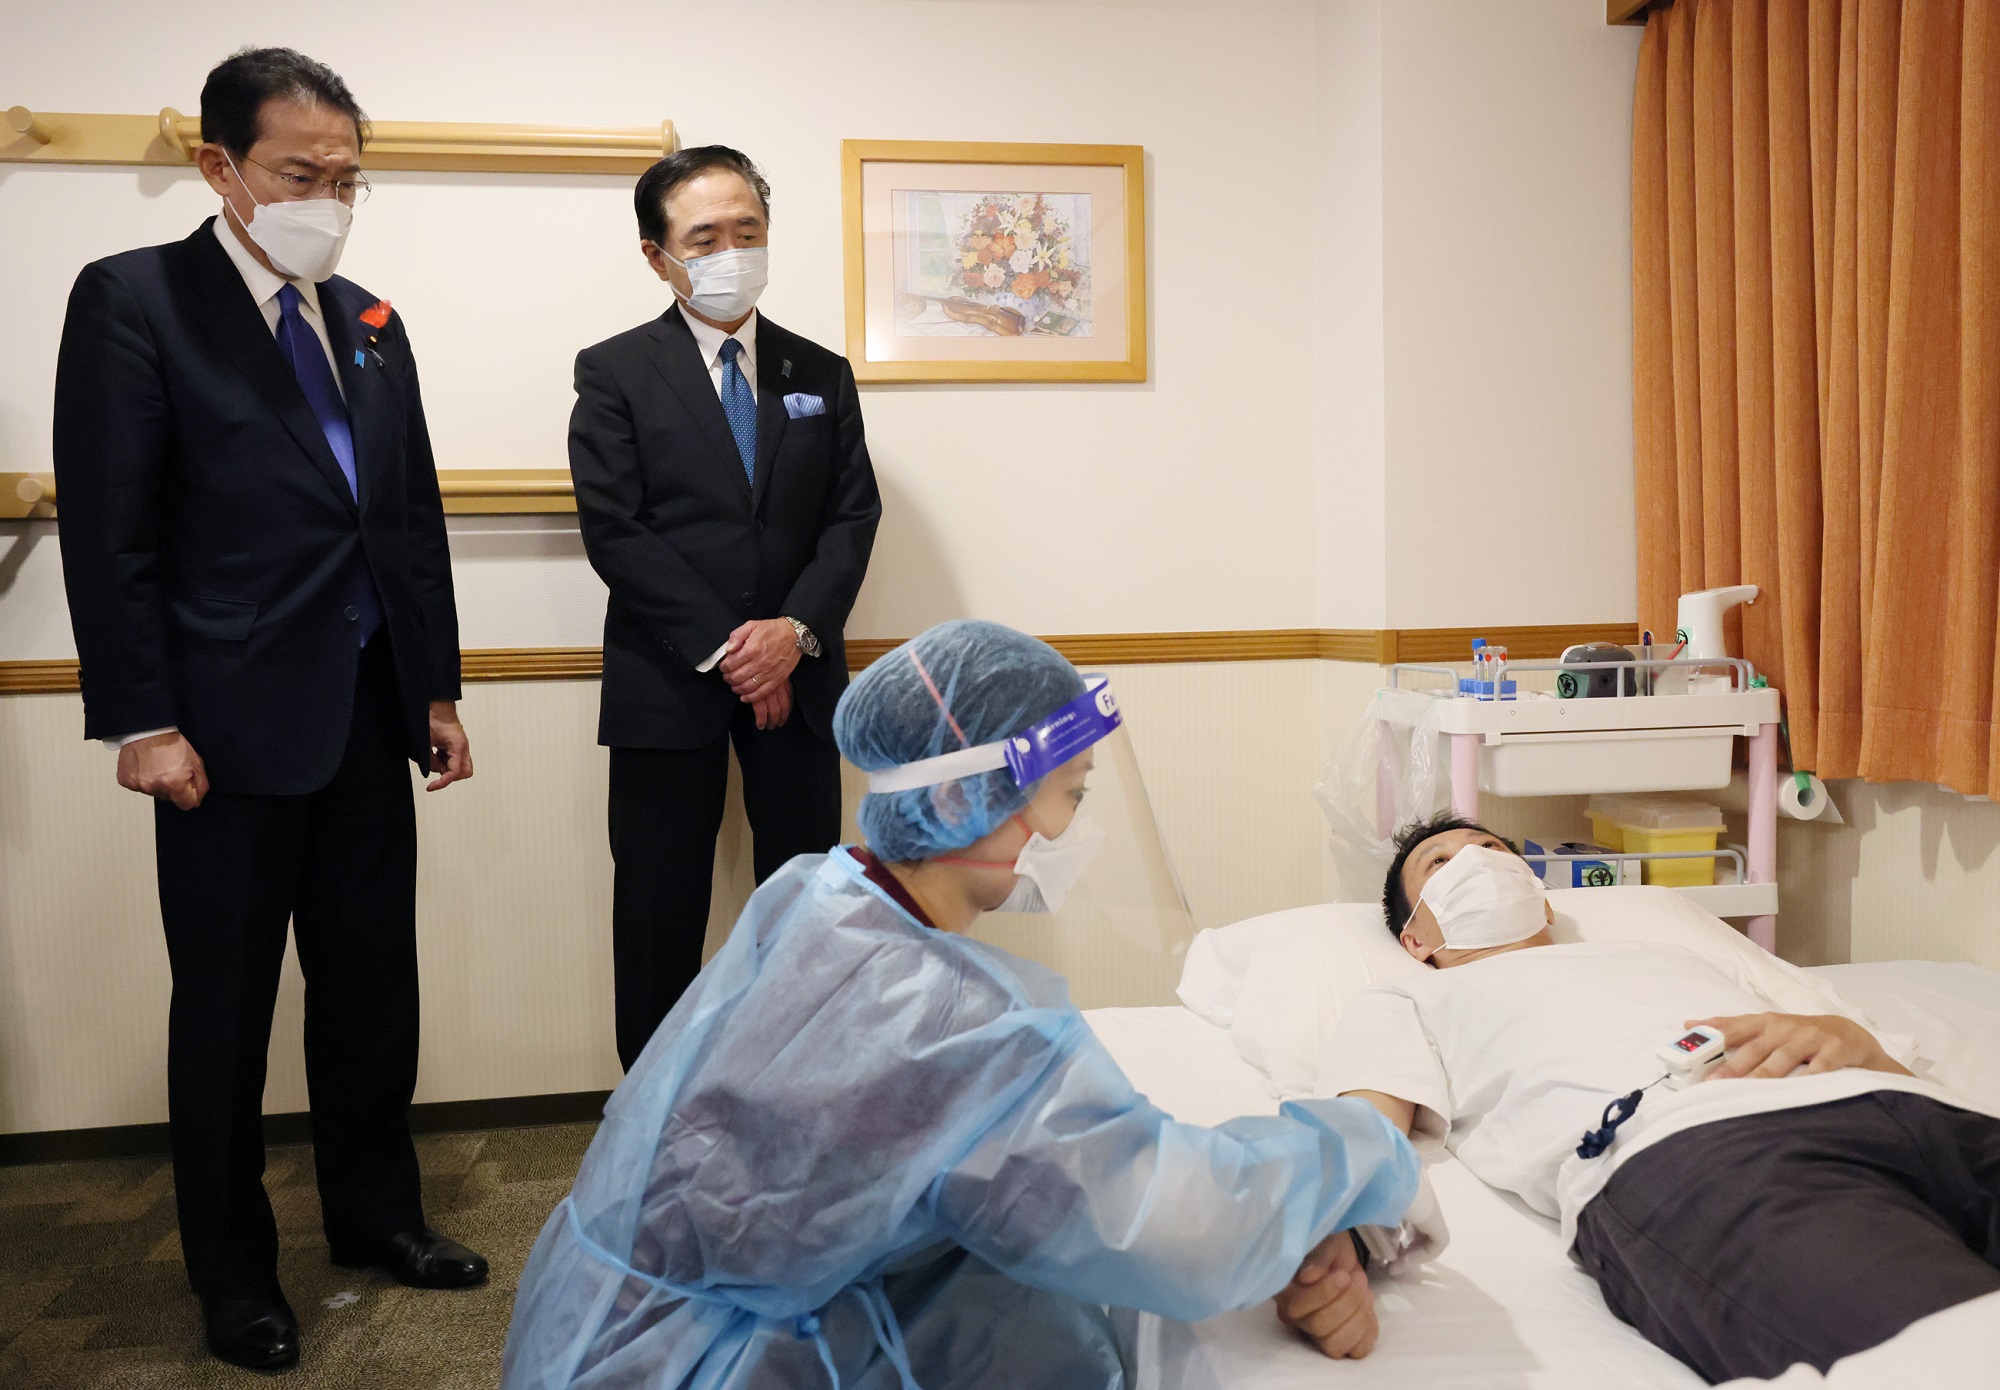 Photograph of the Prime Minister visiting a facility (7)